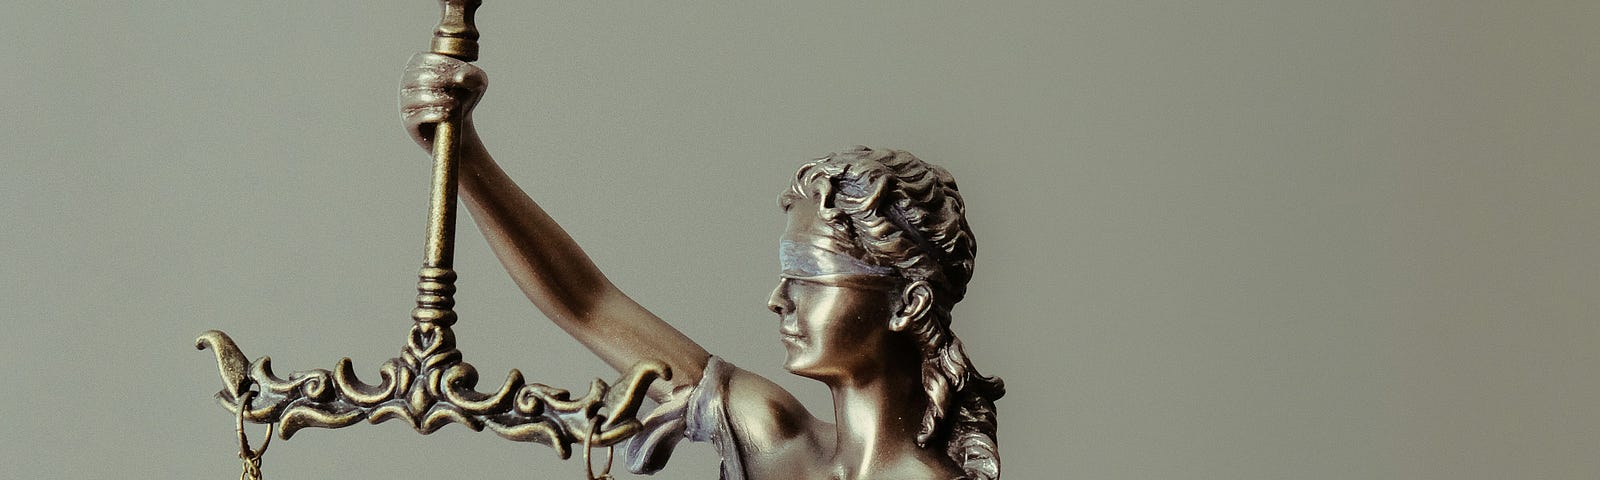 Sculpture of a blindfolded woman holding a sword in one hand and the scales of justice in the other.